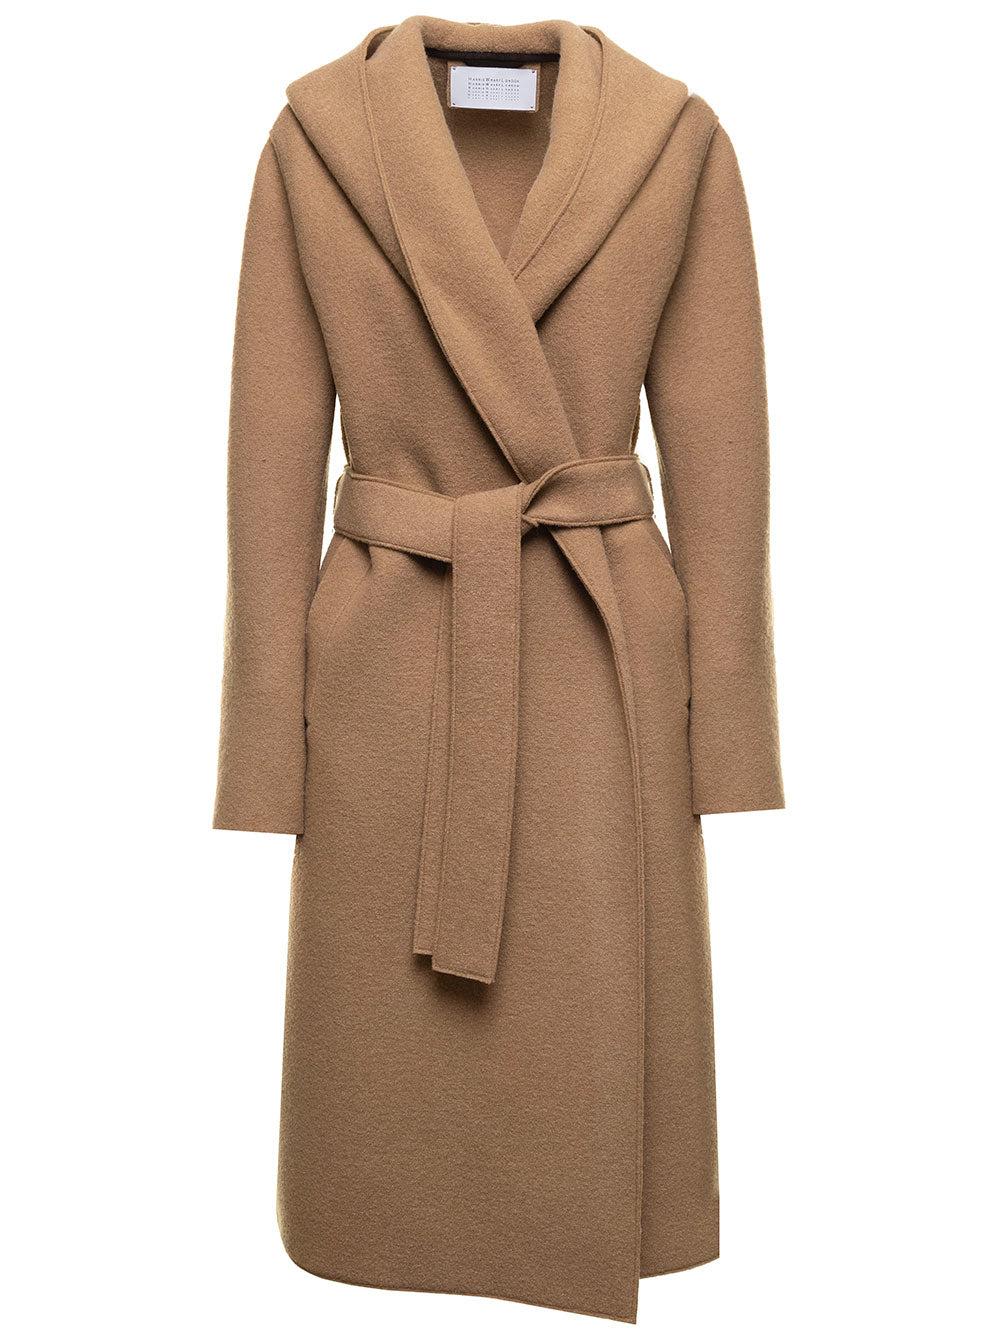 Harris Wharf London Camel Brown Wrap Coat In Wool Woma in Natural | Lyst